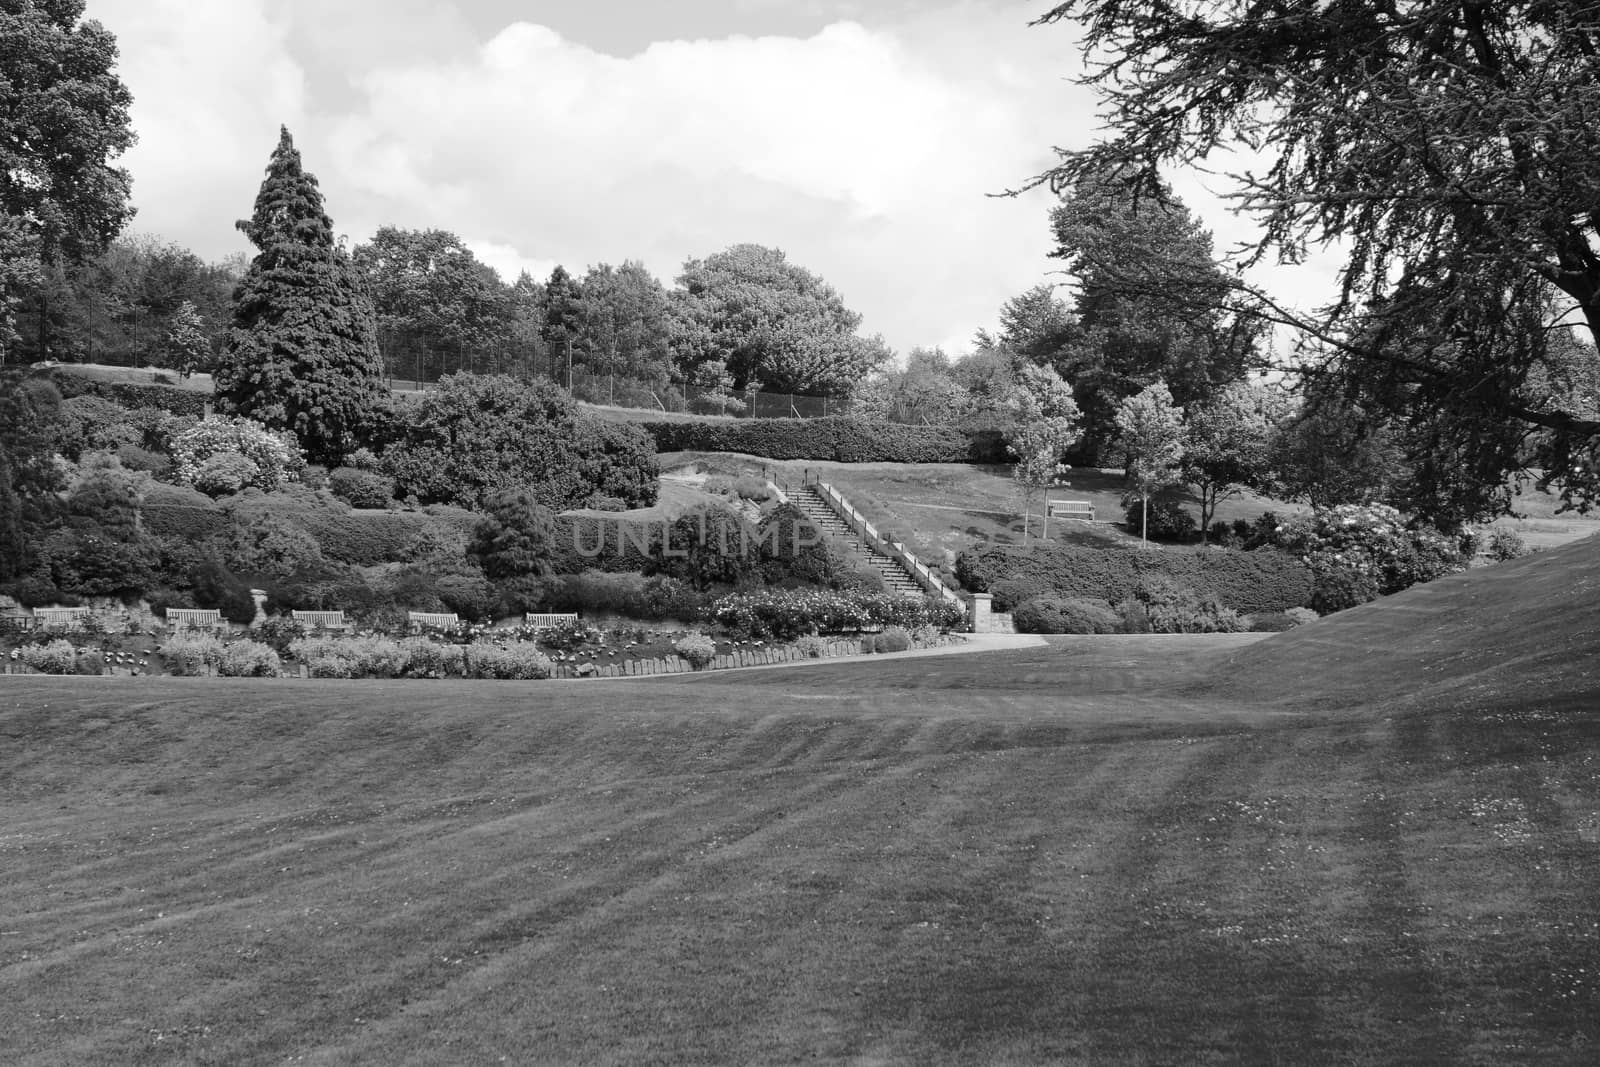 Calverley Grounds public park in Tunbridge Wells with ornamental gardens and diverse trees and bushes - monochrome processing